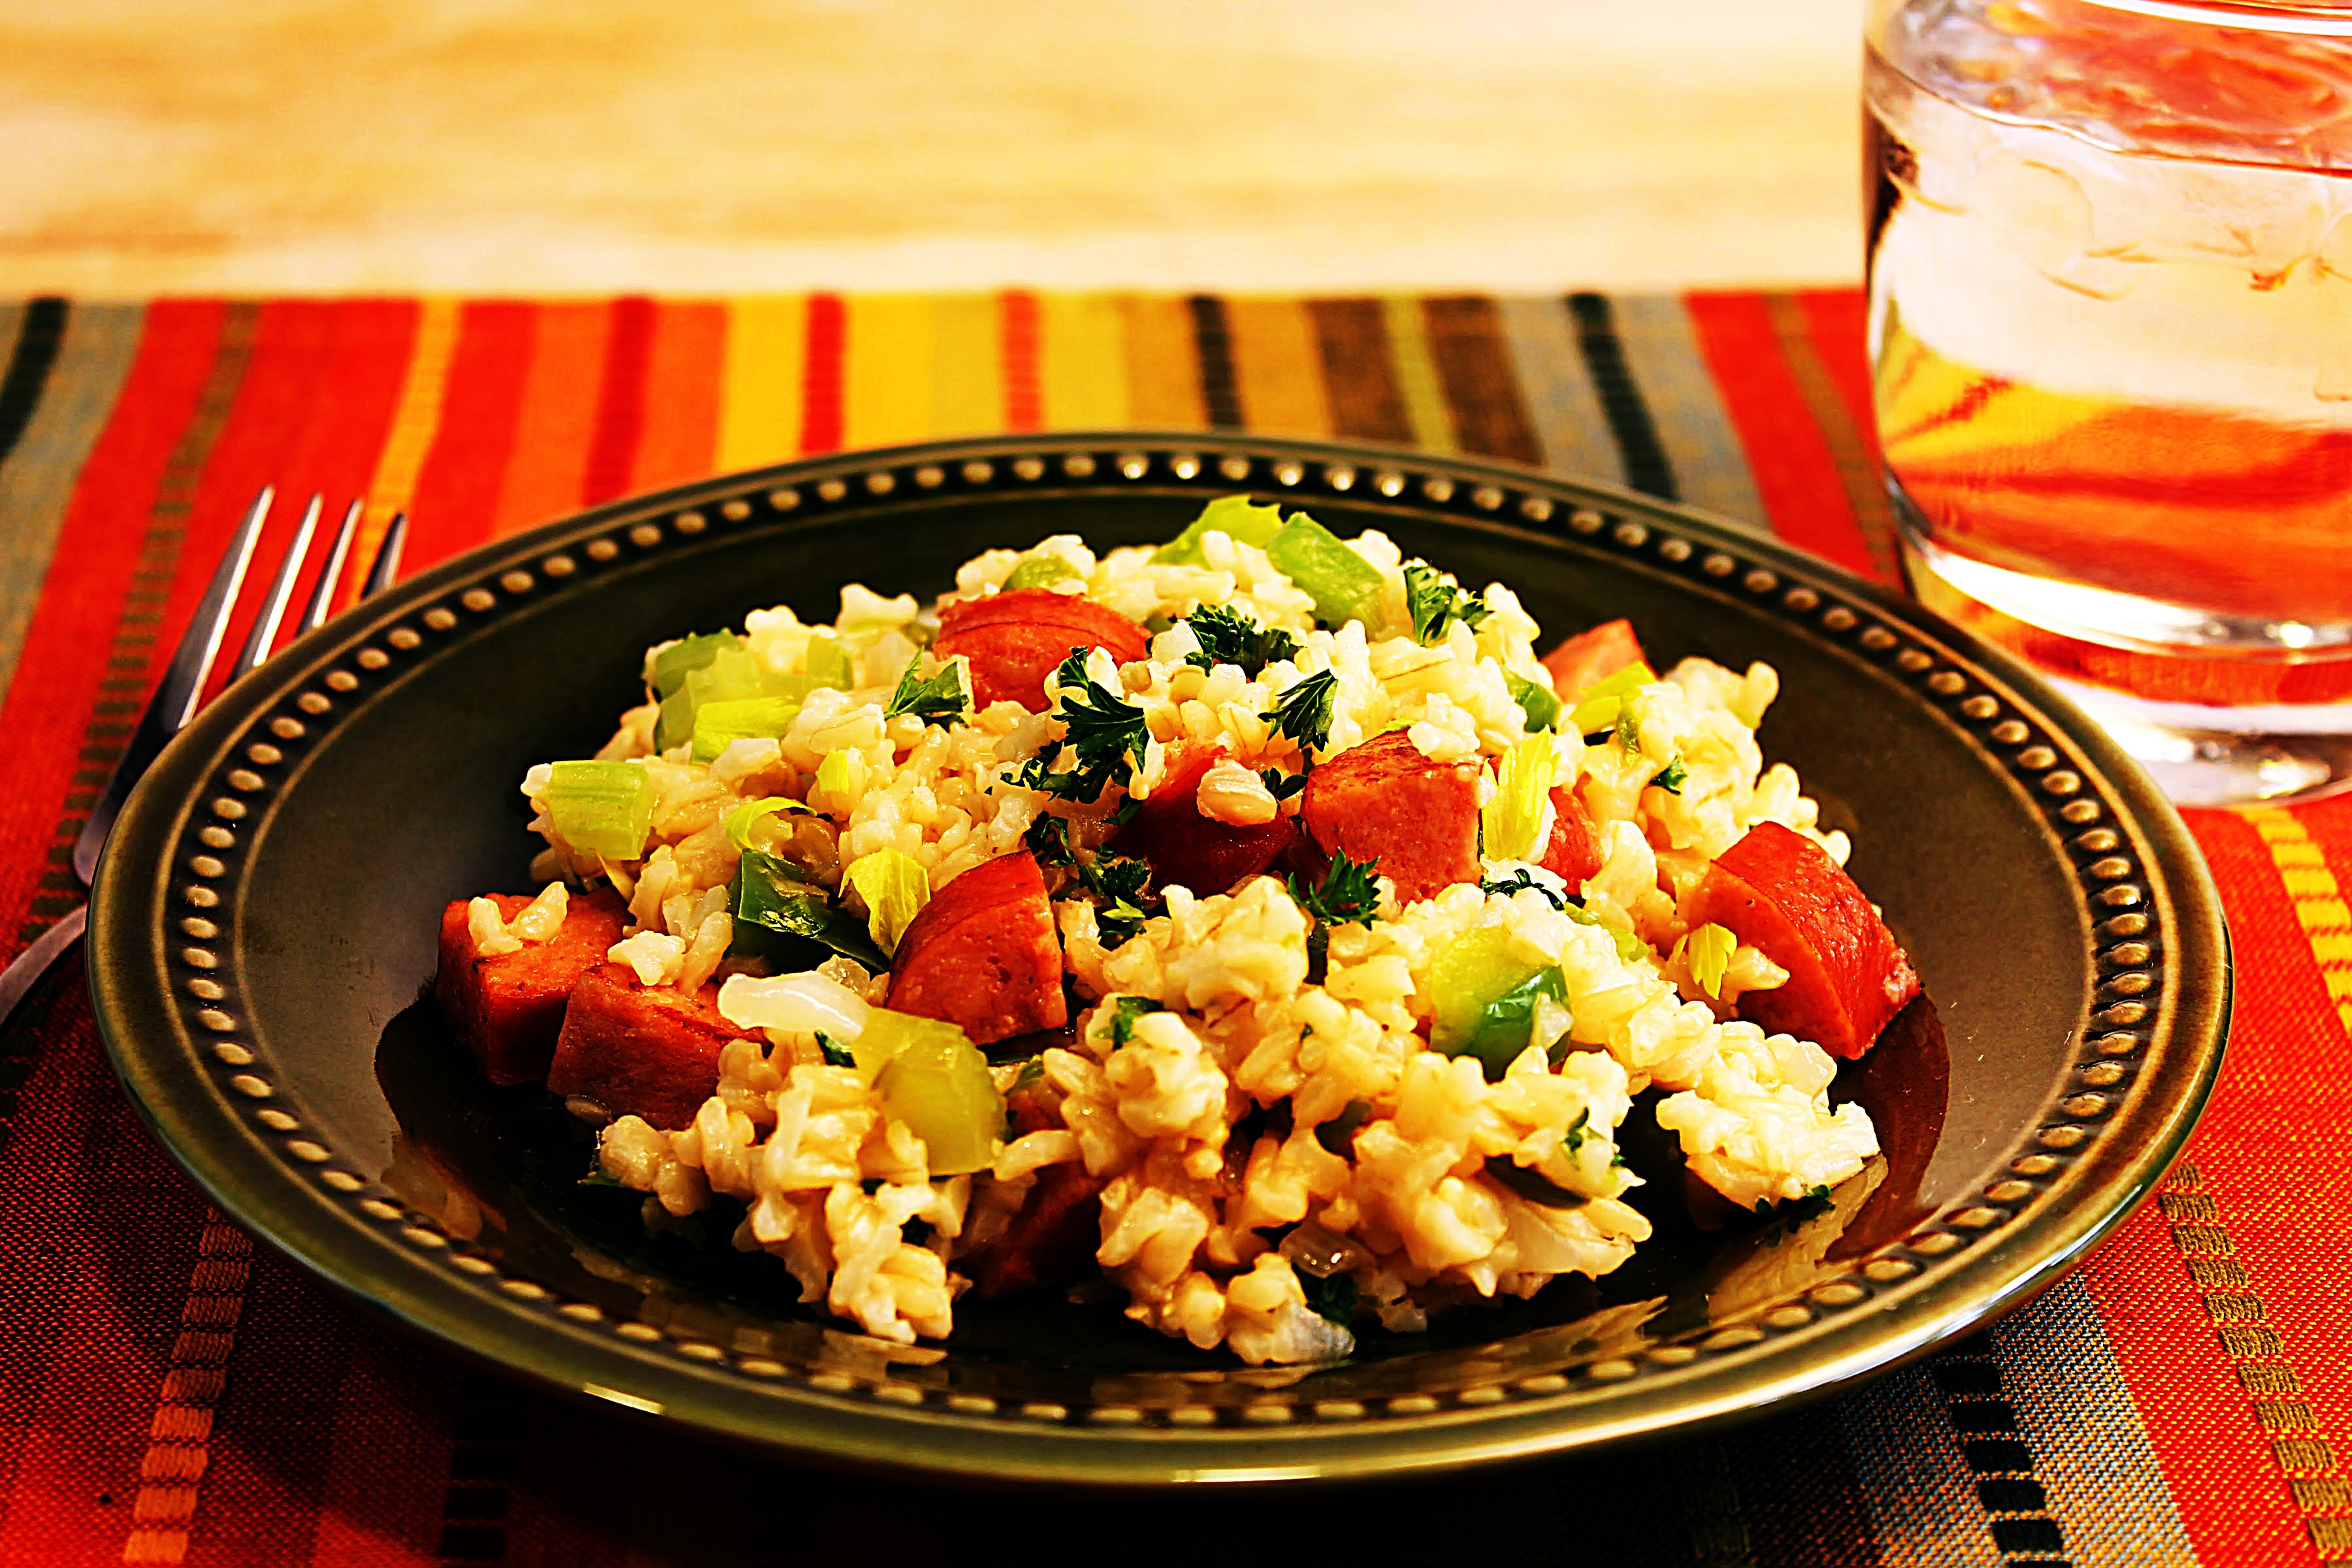 Stupid-Easy Recipe for Dirty Rice with Andouille Sausage (#1 Top-Rated)